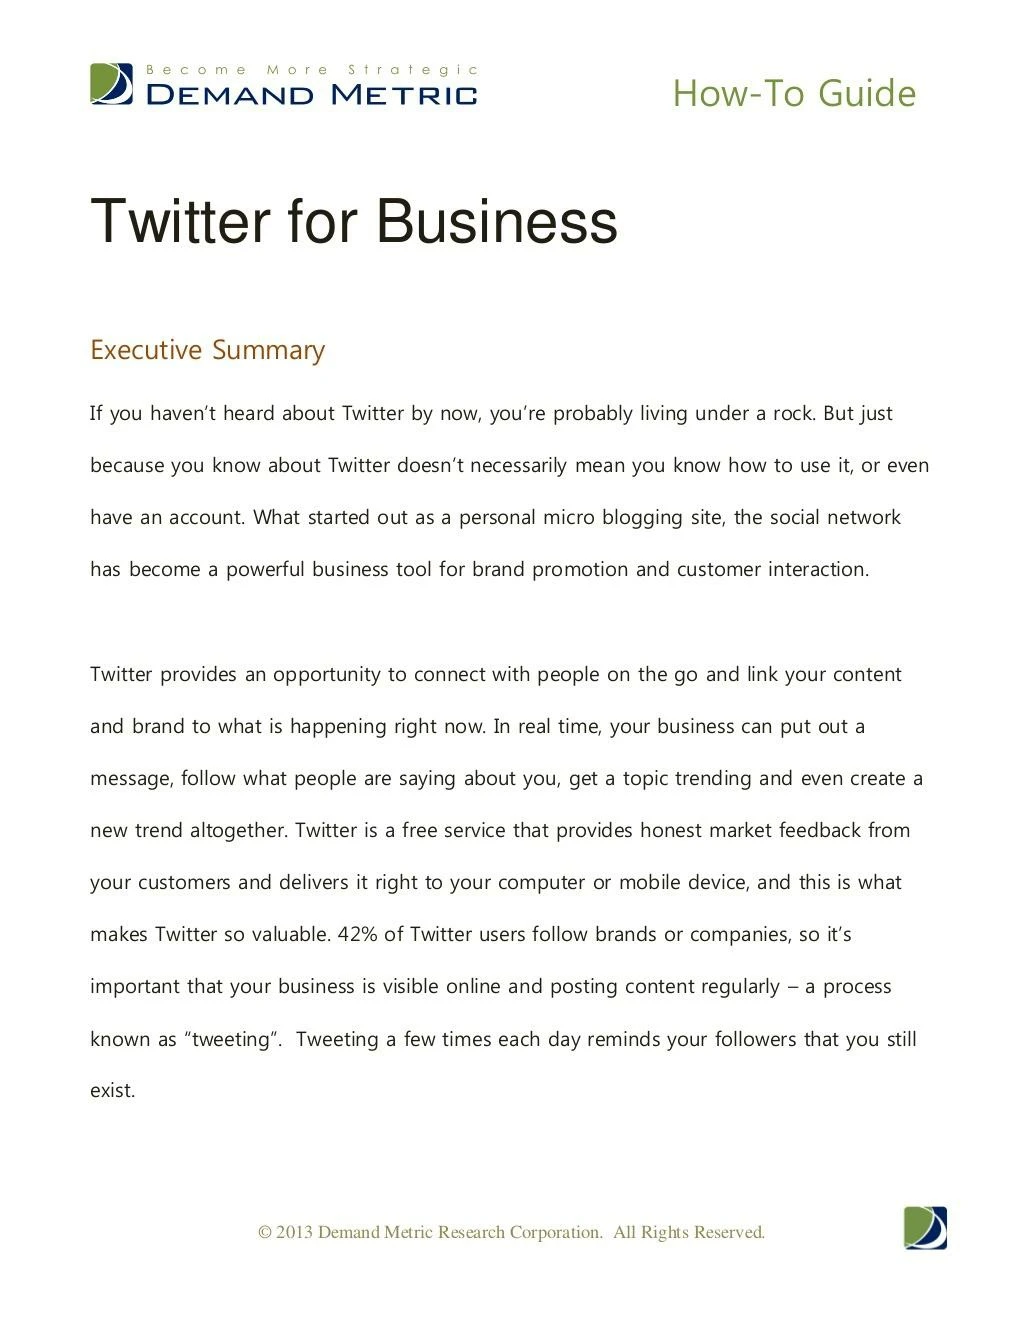 how to guide using twitter for business